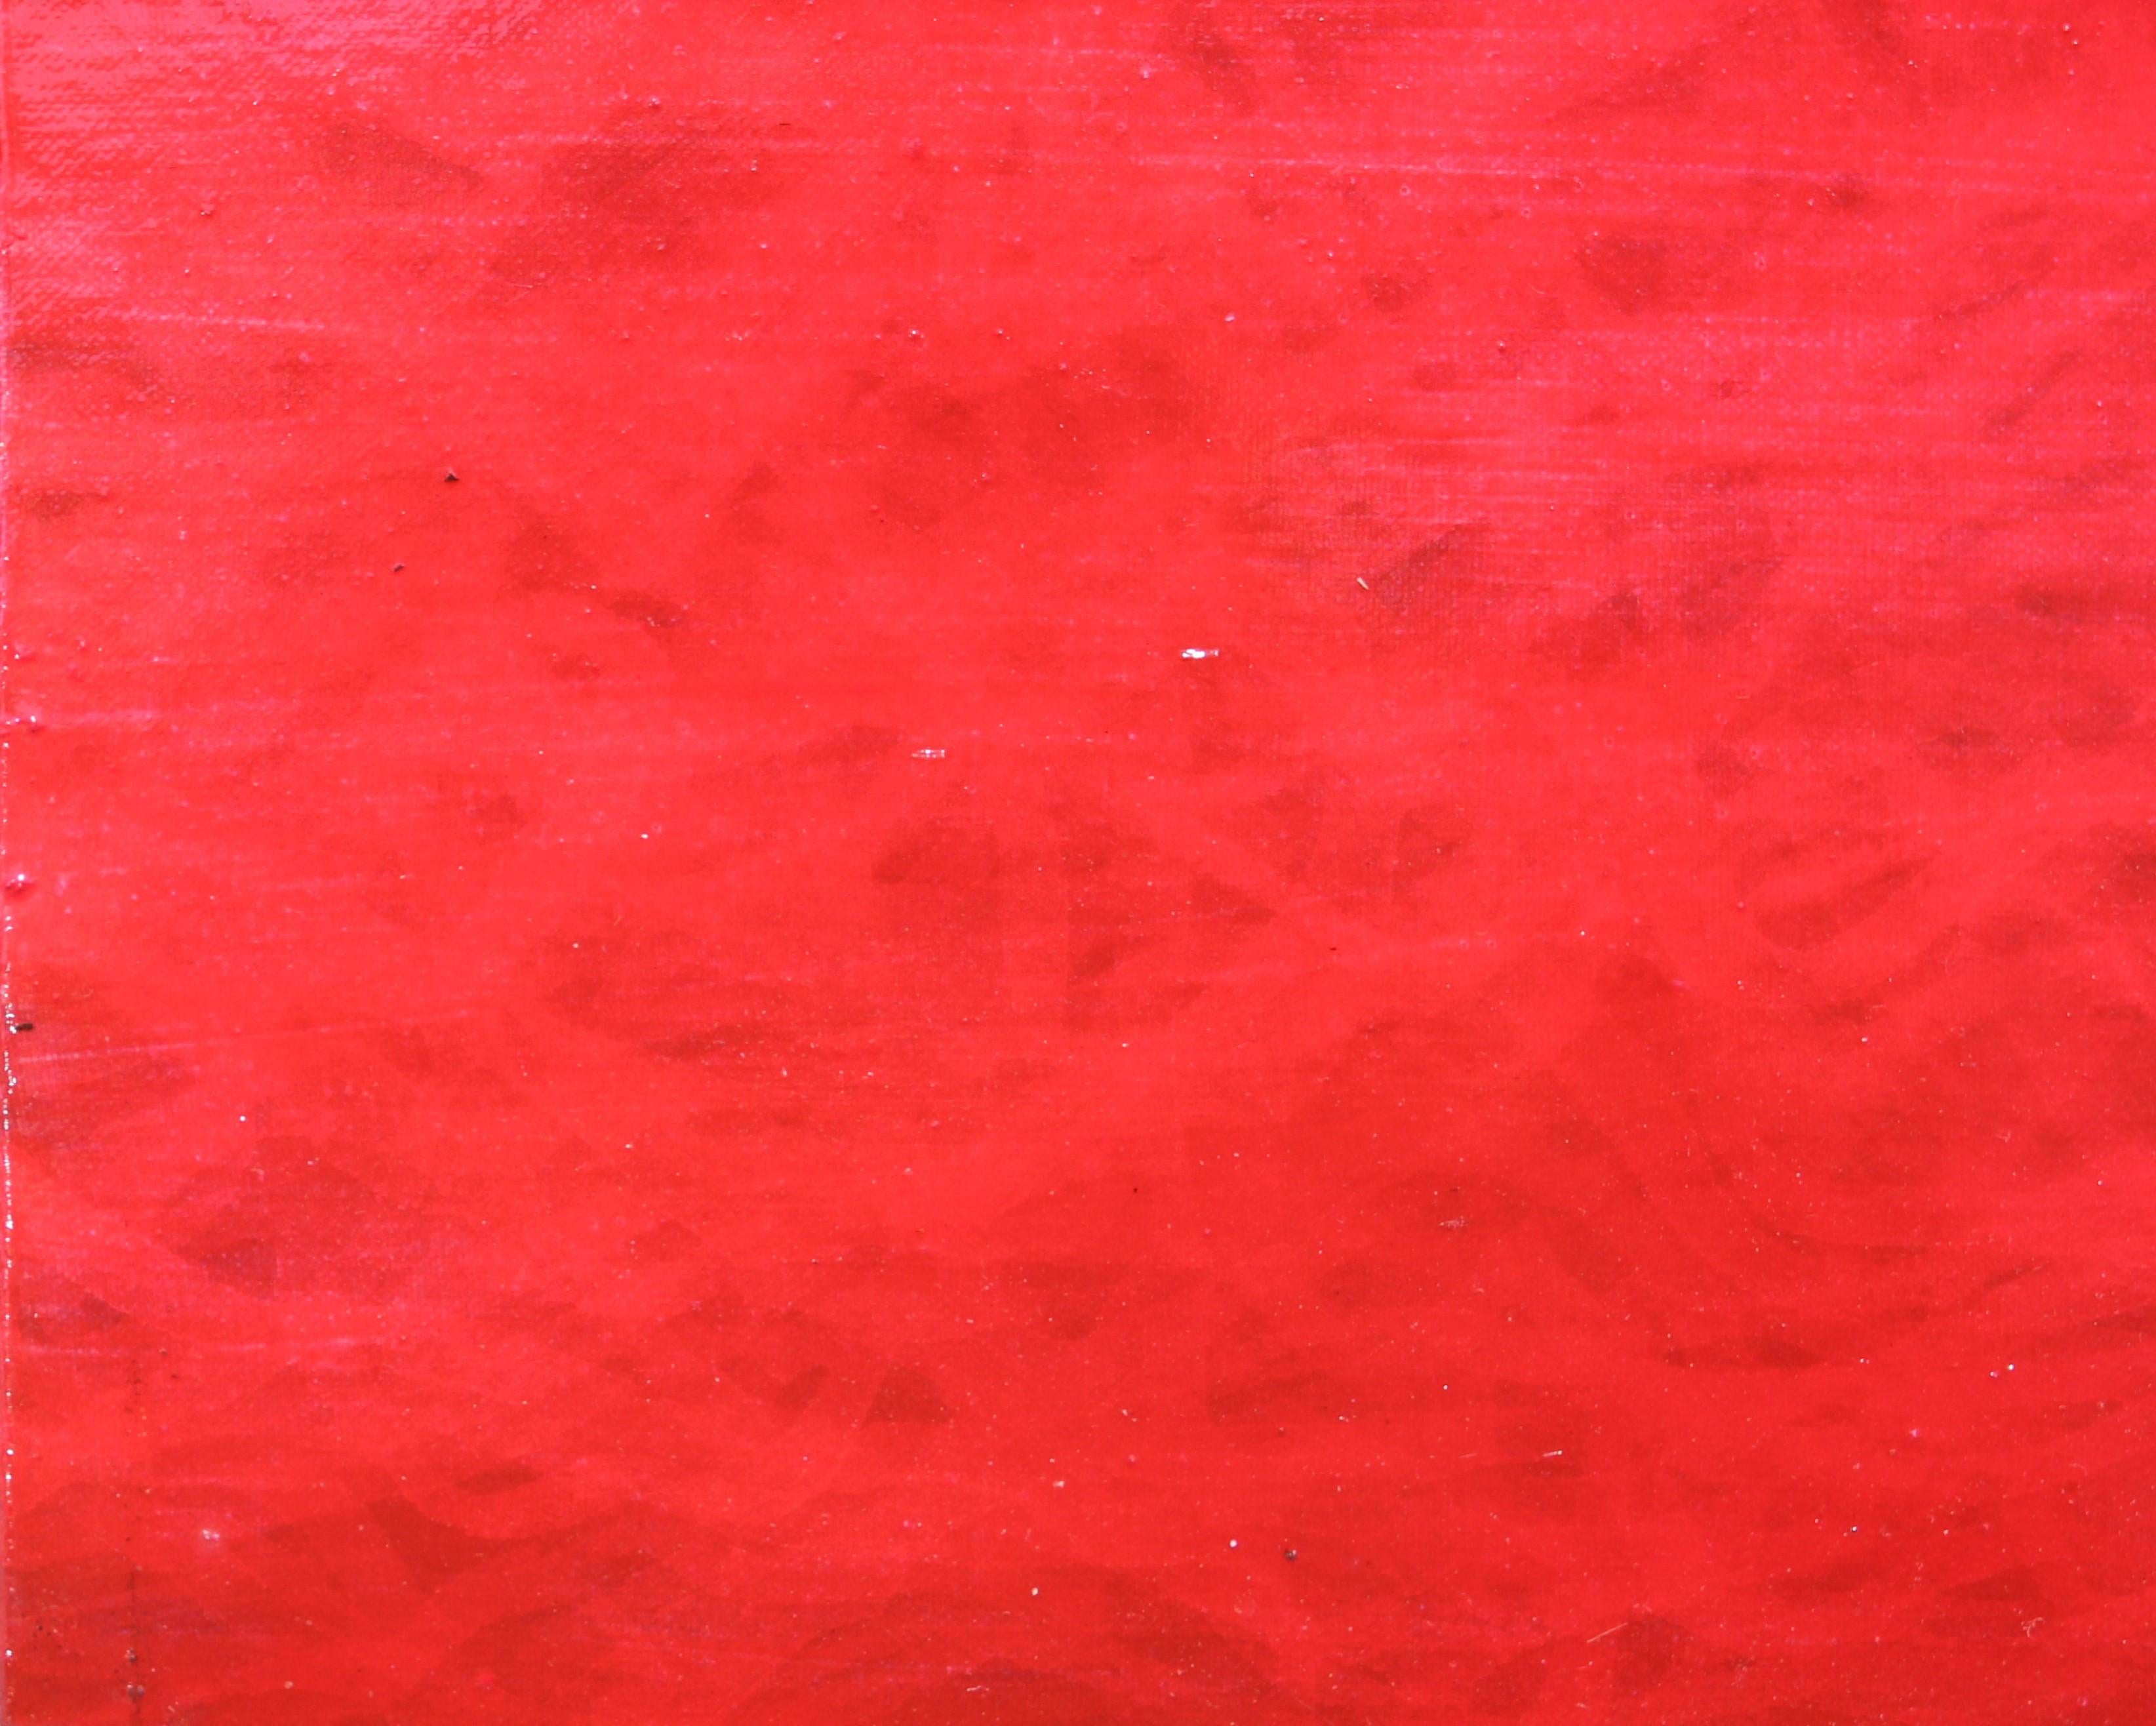 Red abstract color field painting featuring subtle variations that create a dynamic and lively composition. The paint was allowed to extend past the edge of the canvas creating a drip effect along the edge. Currently unframed to showcase the edge.